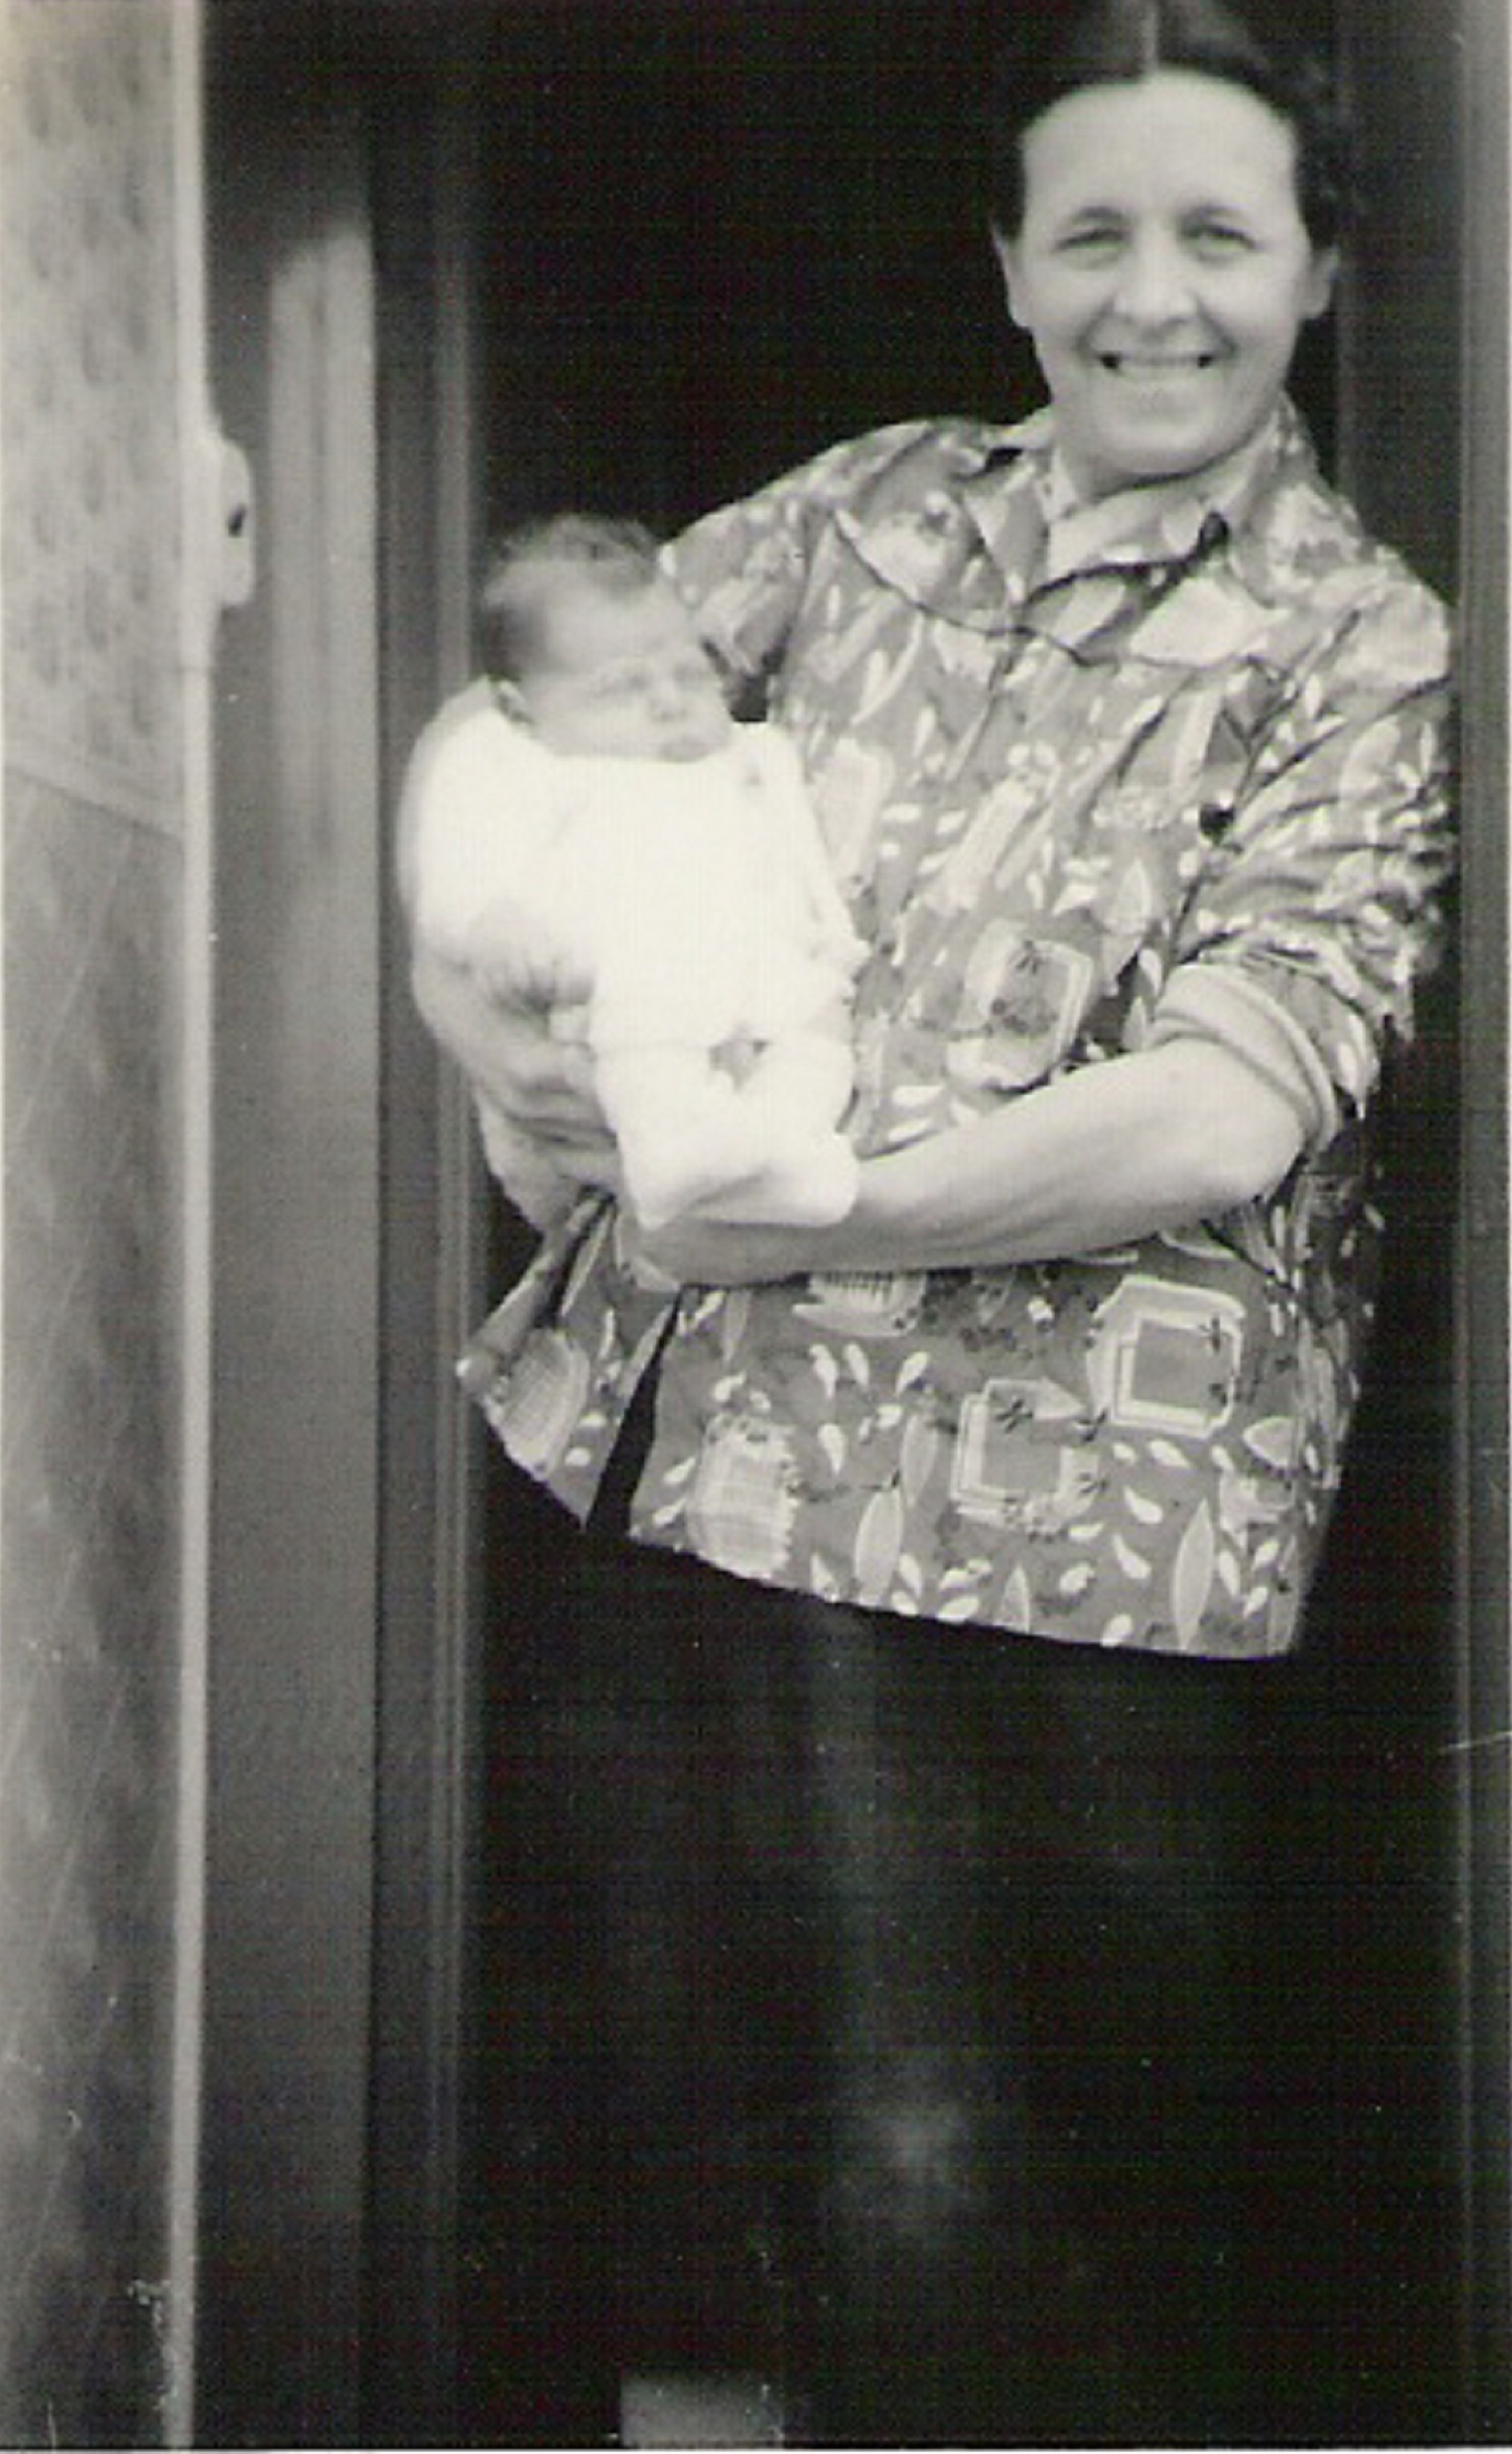 Graham as a baby with his mum, 849 Ripple Road